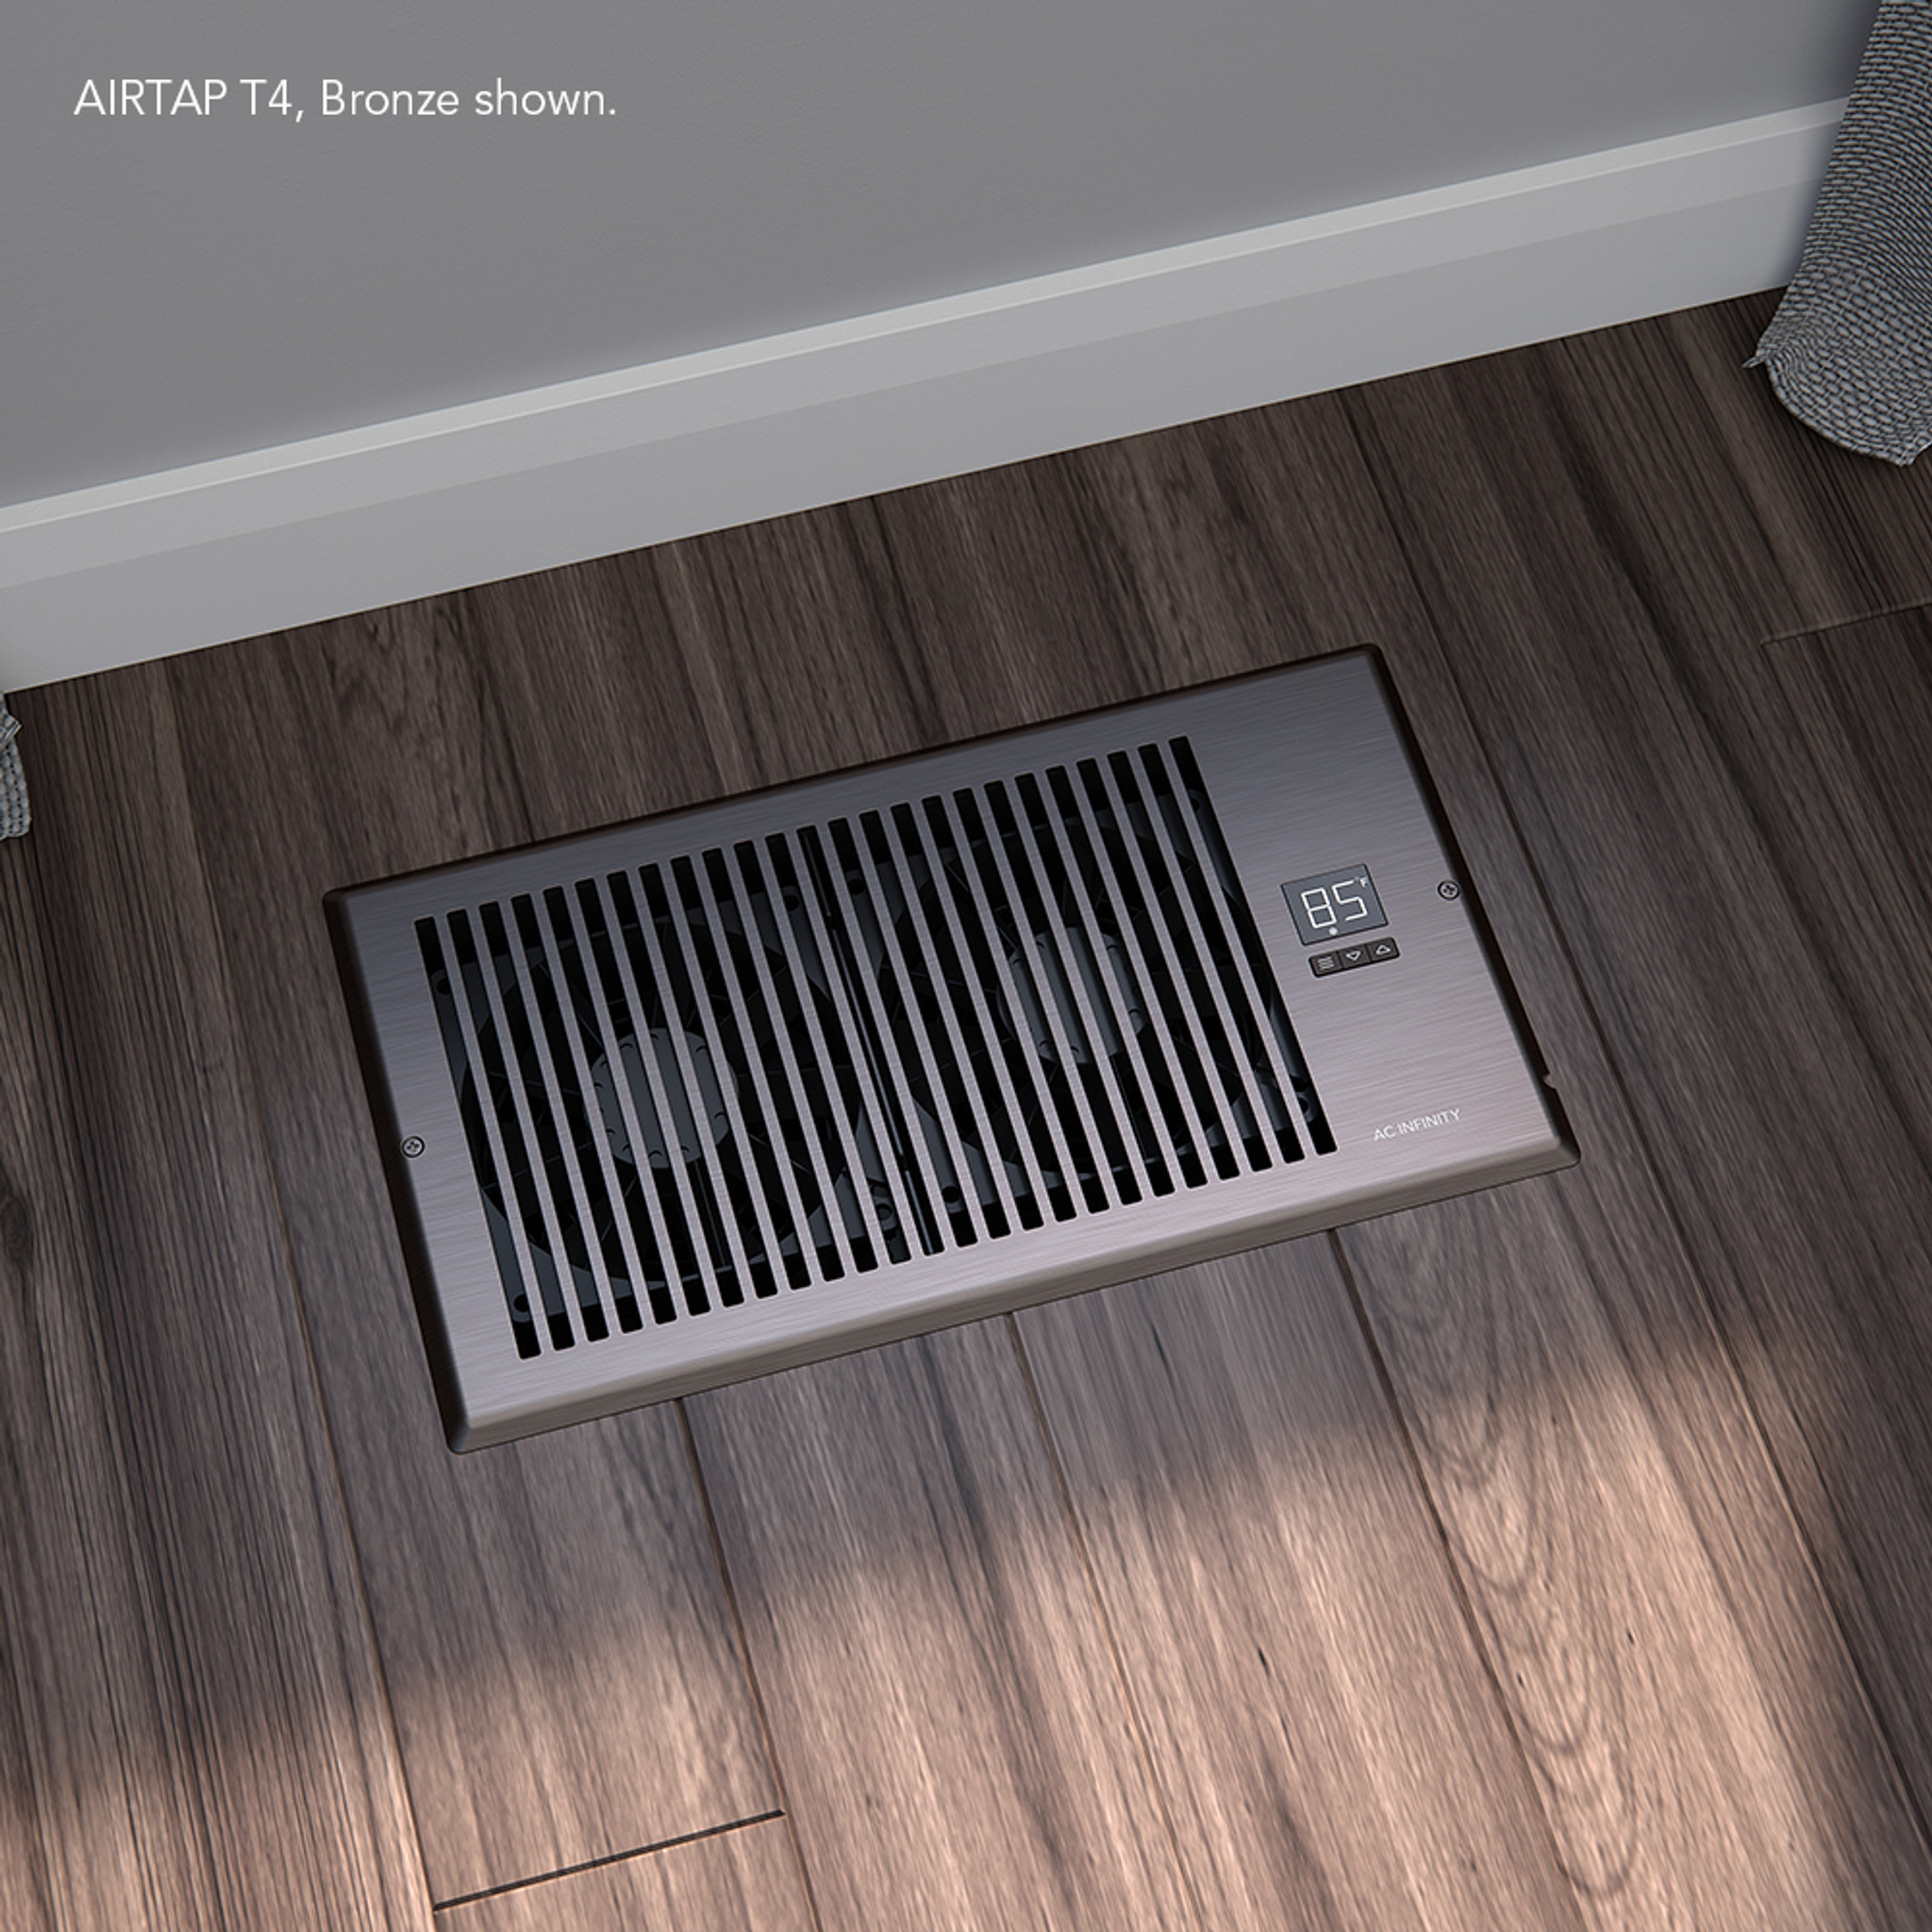 AIRTAP T6, Quiet Register Booster Fan System, Bronze, for 6” x 12